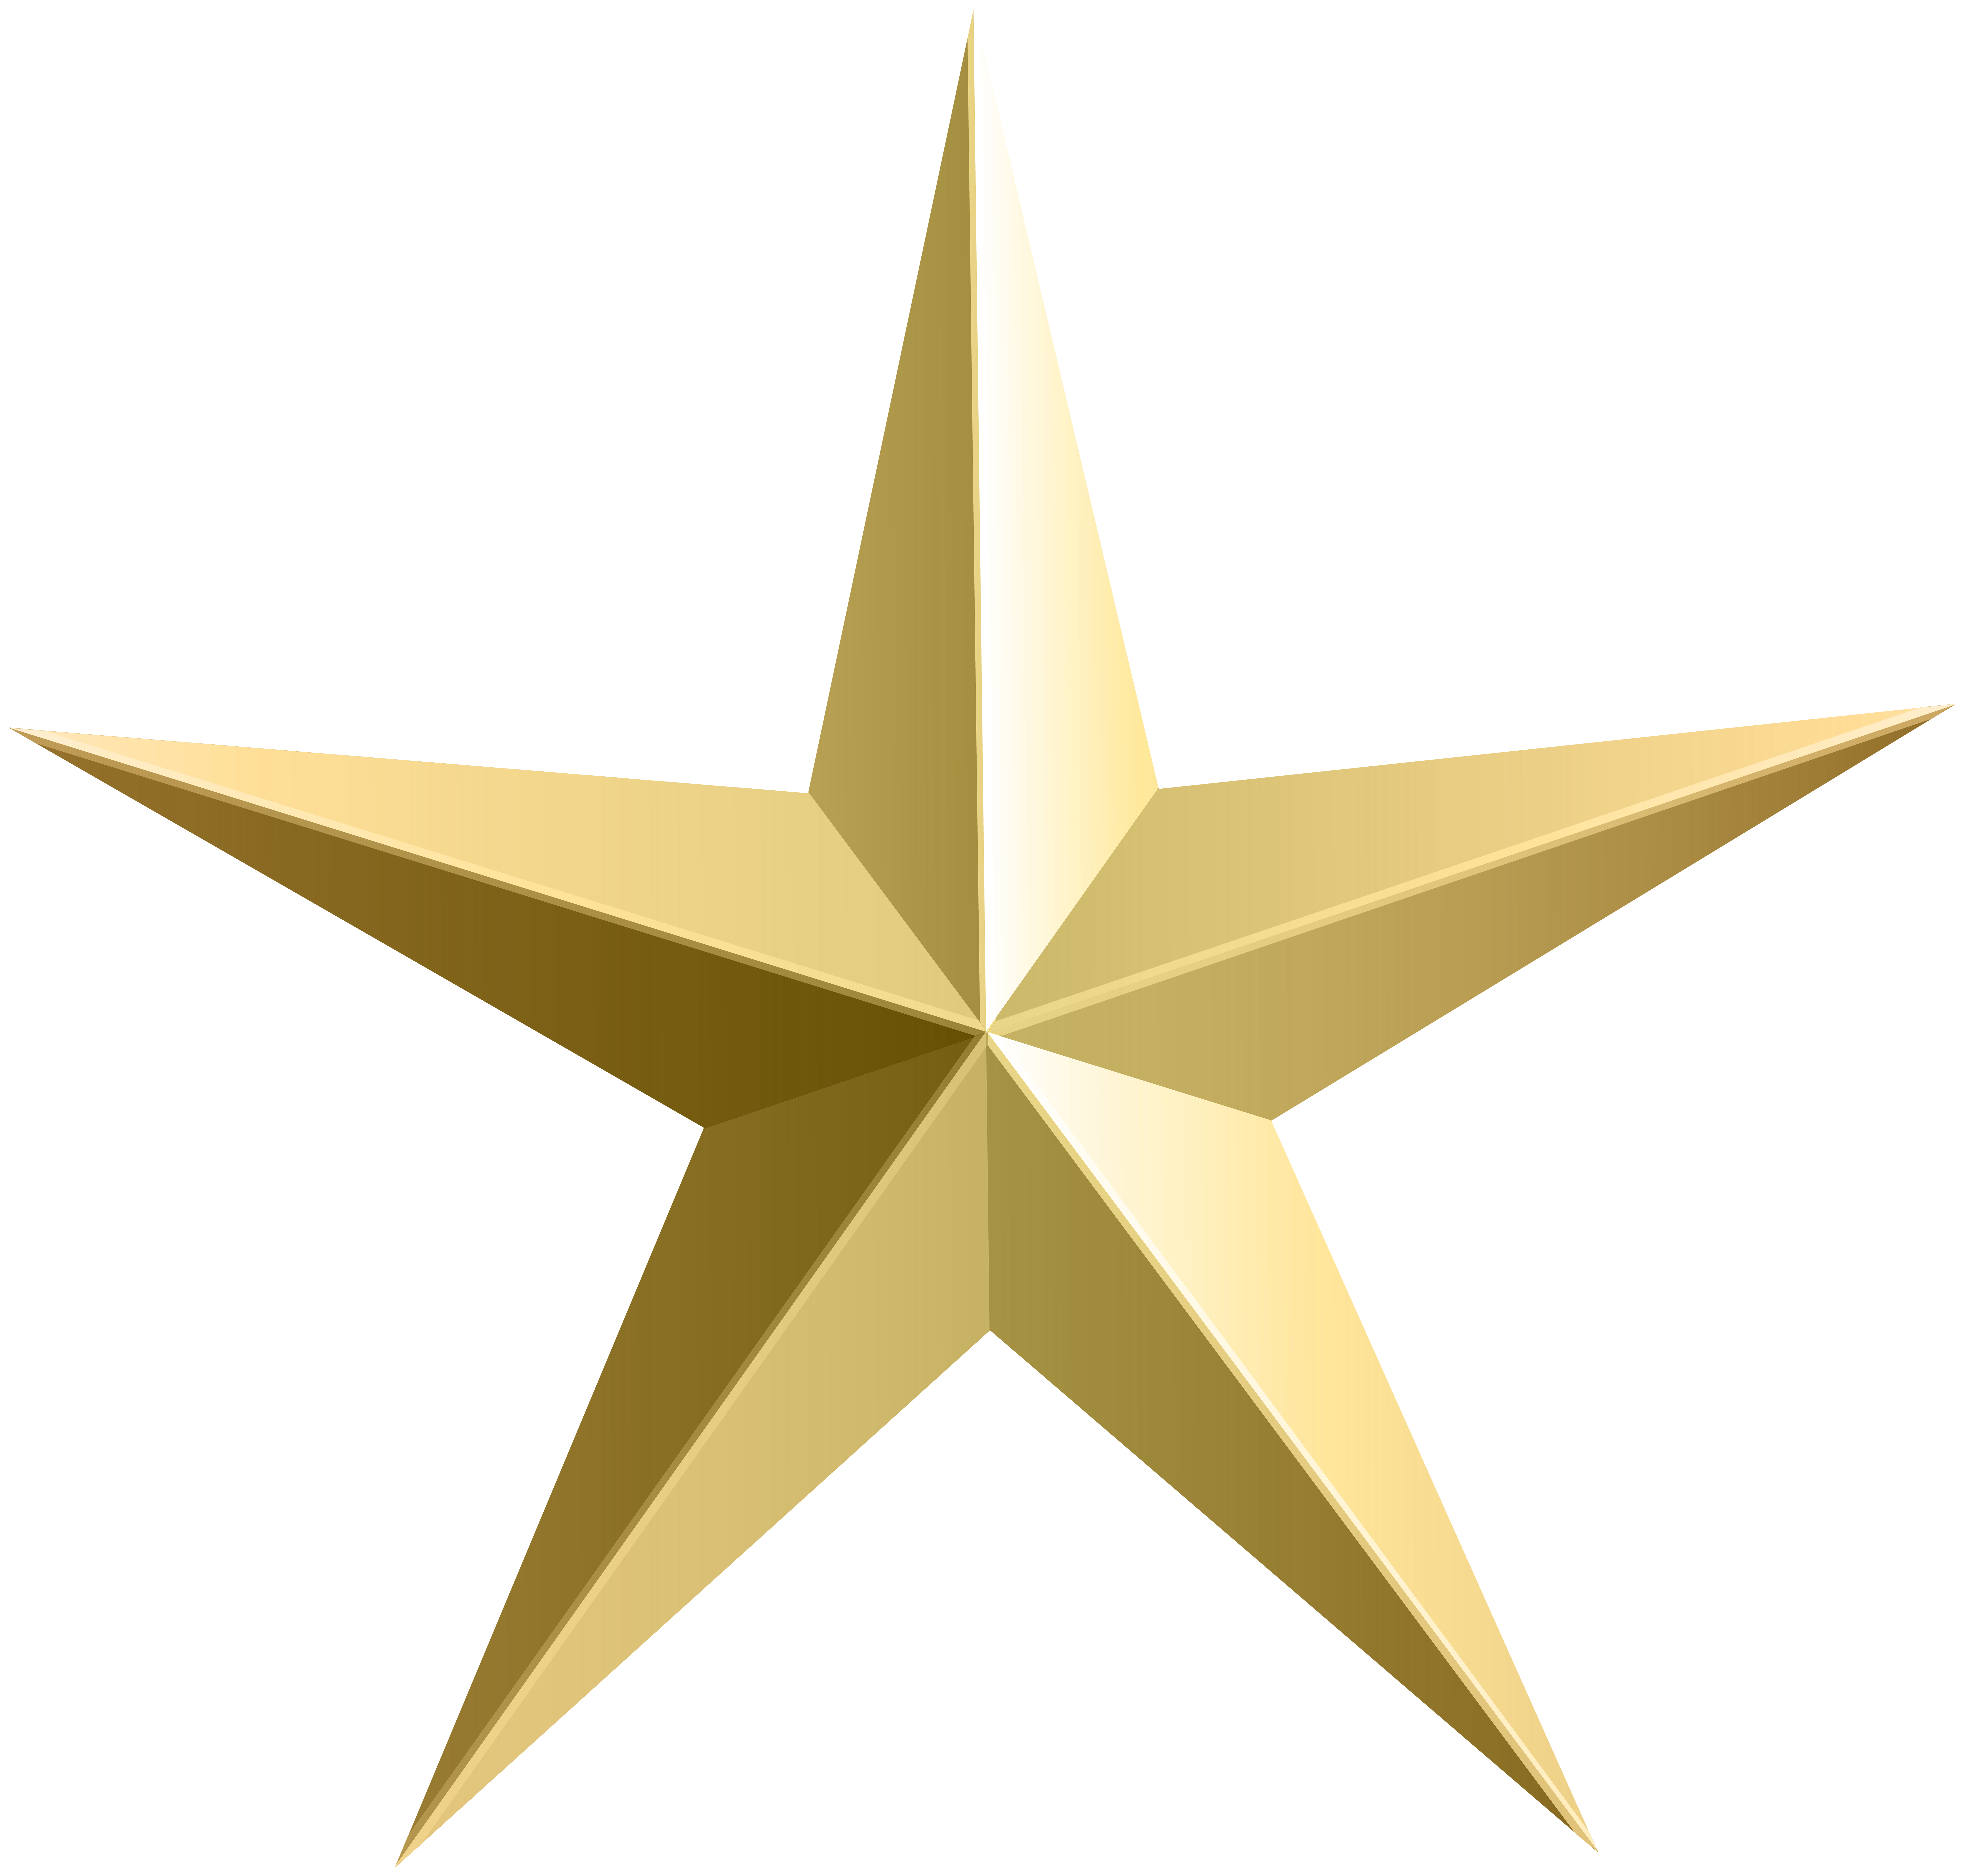 gold star clipart no background